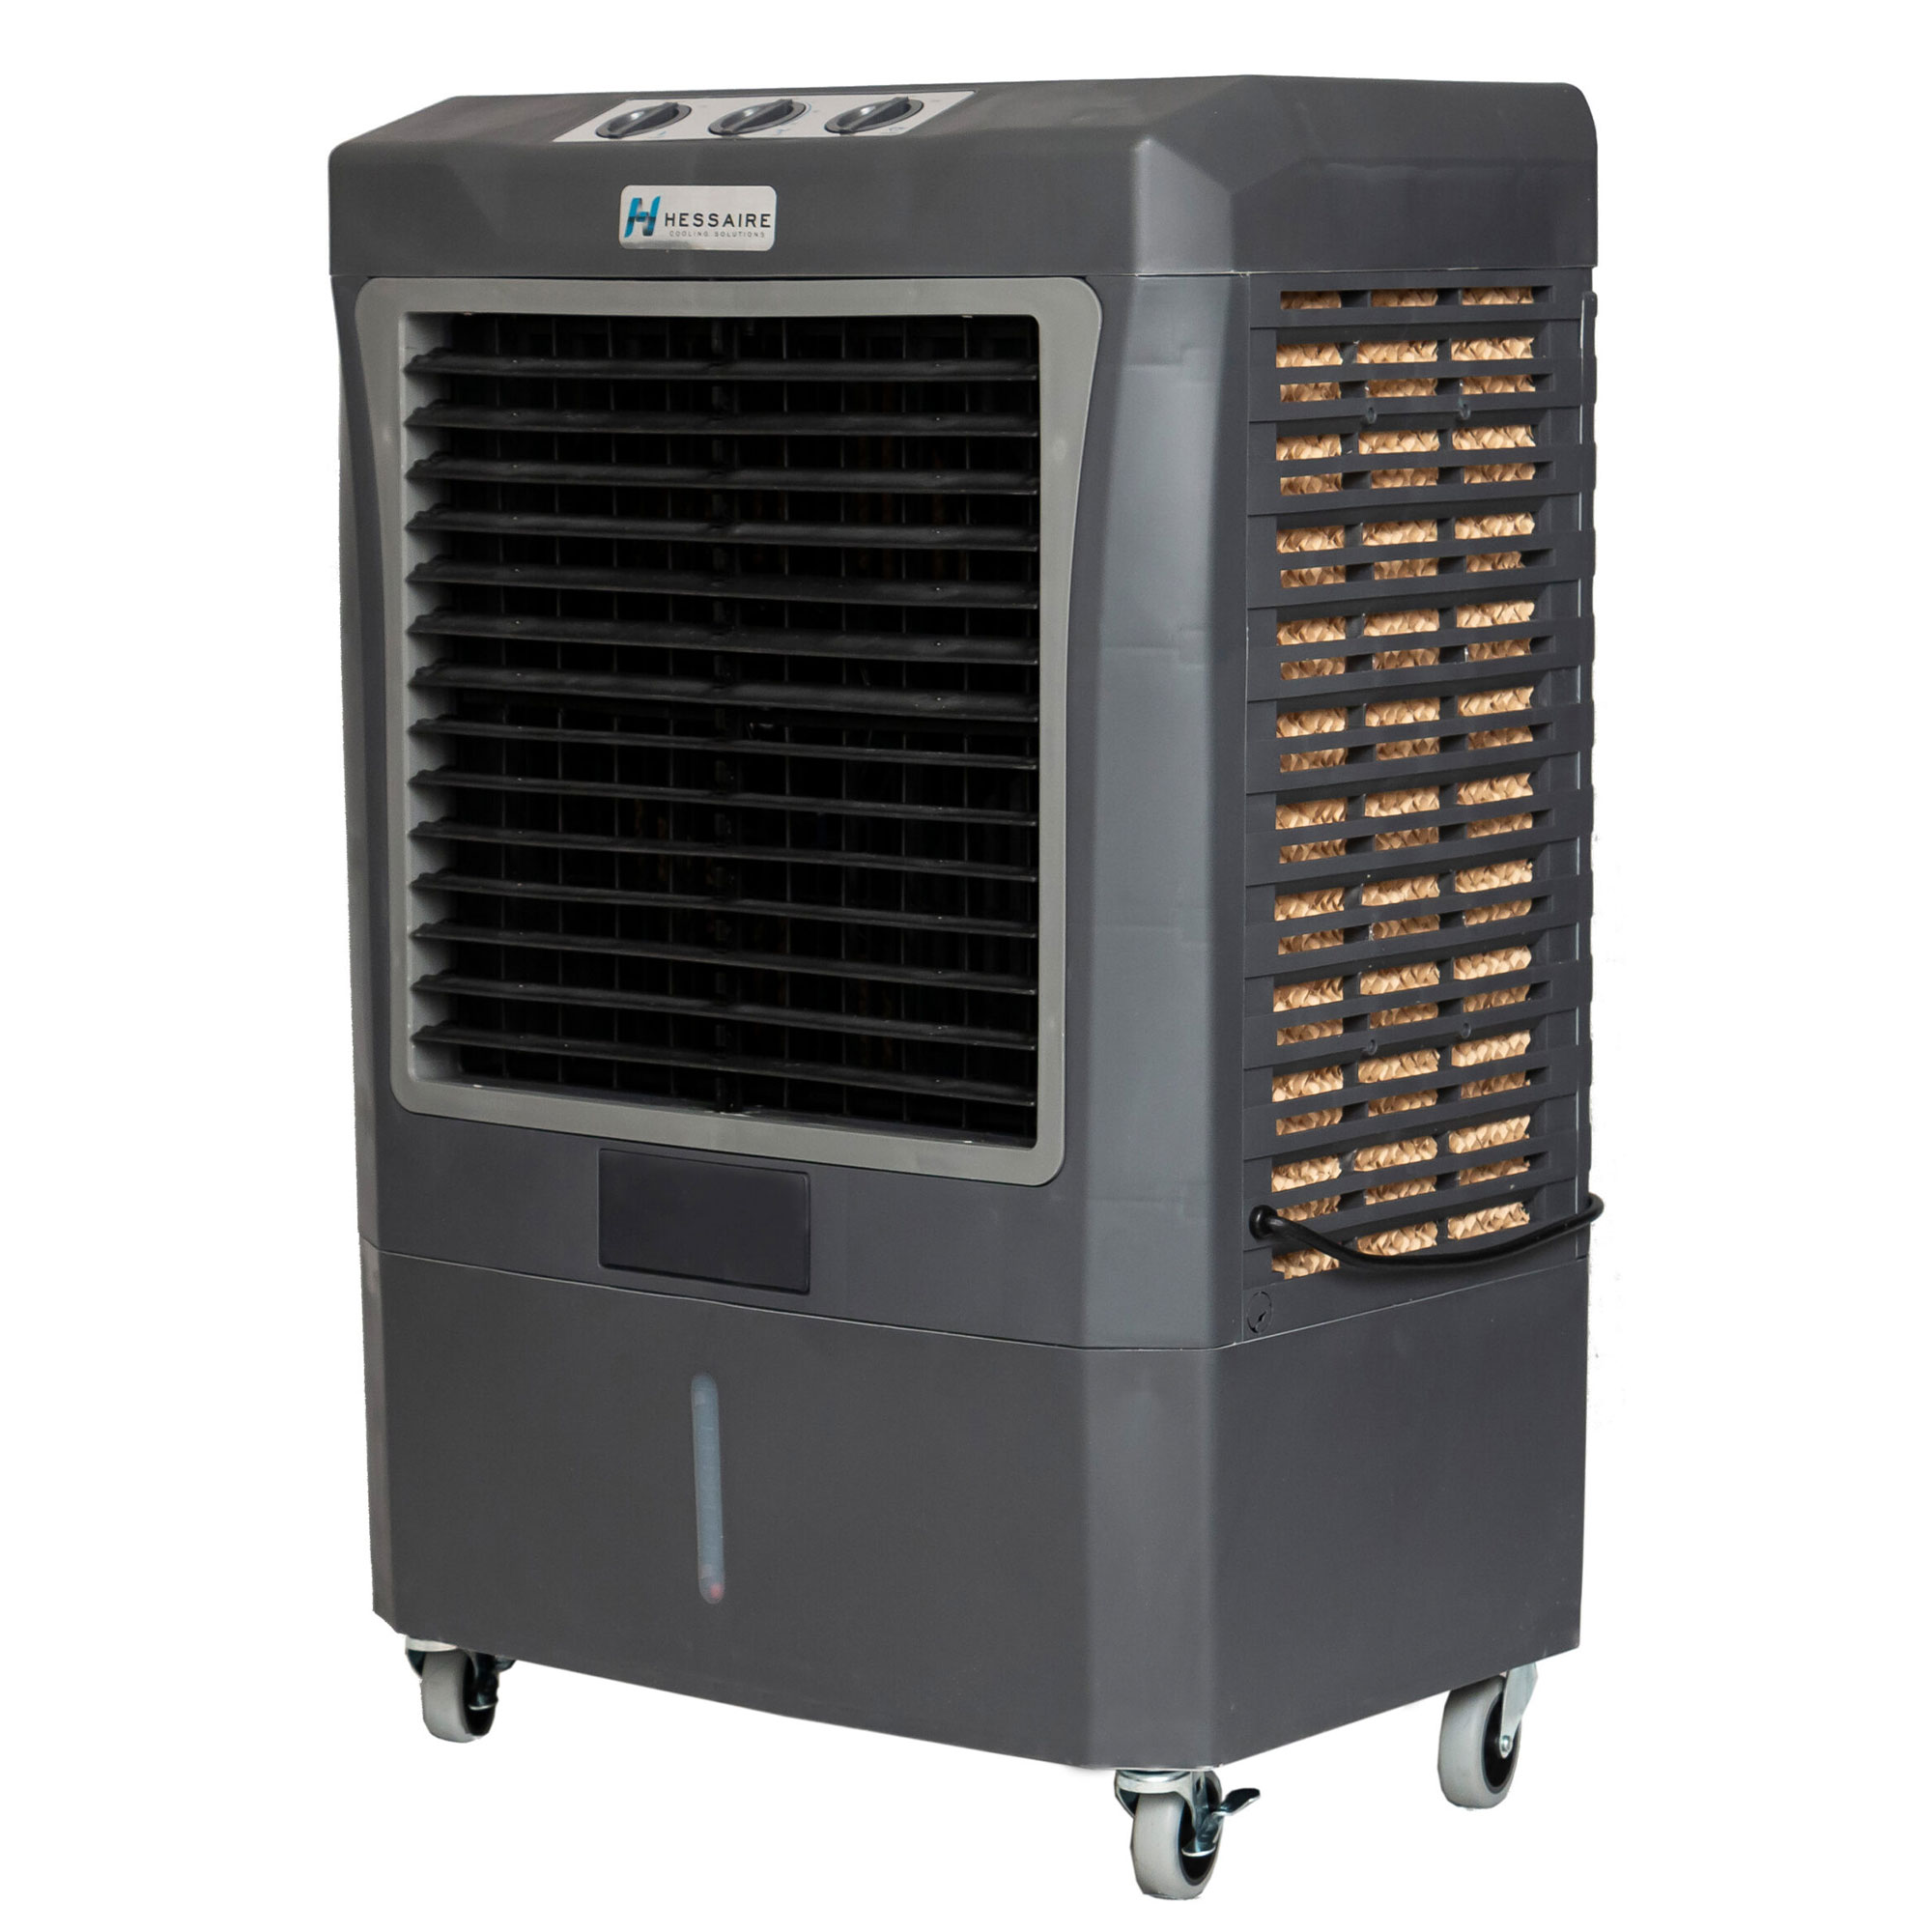 Hessaire MC37M Indoor/Outdoor Portable 950 Sq Ft Evaporative Air Cooler - image 1 of 16